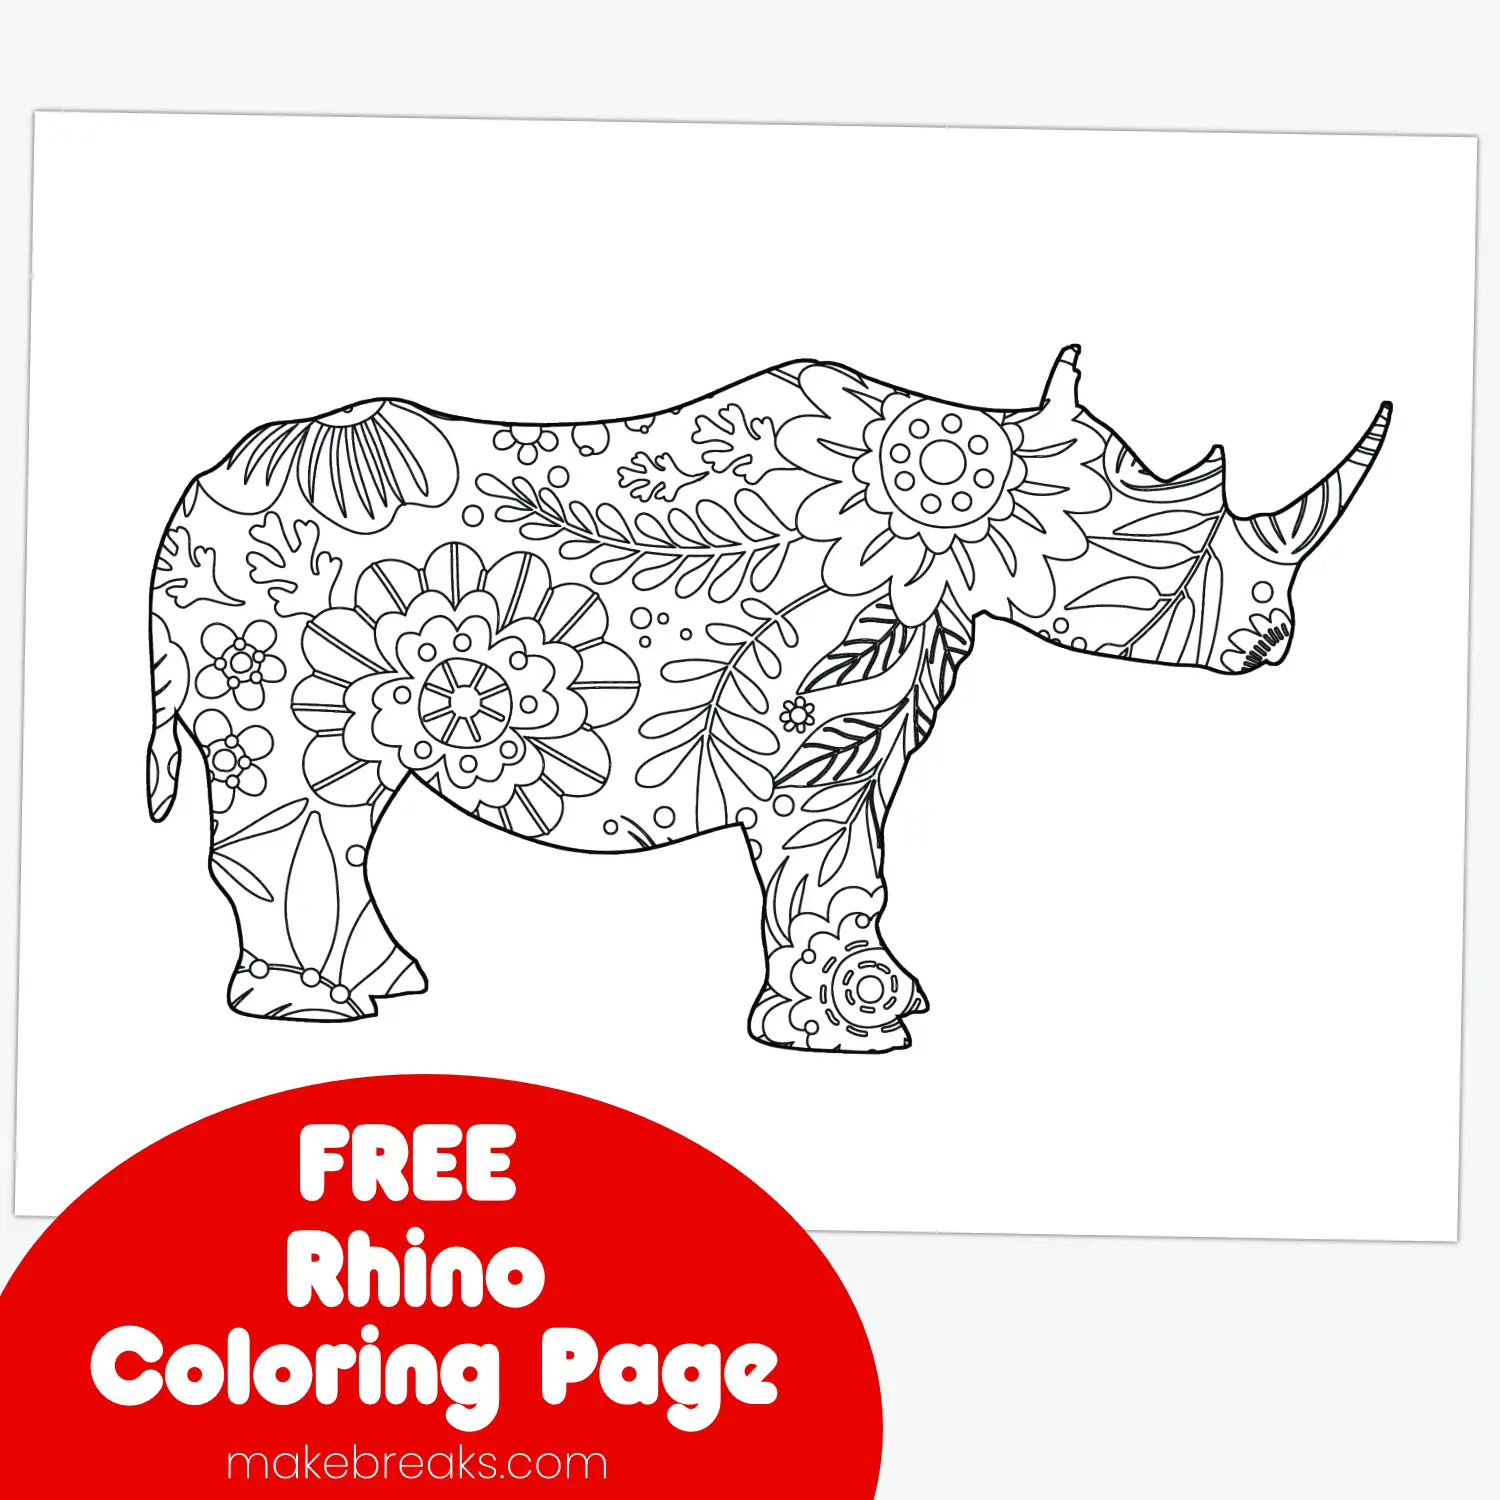 Unleash your creativity with our intricate rhino coloring page